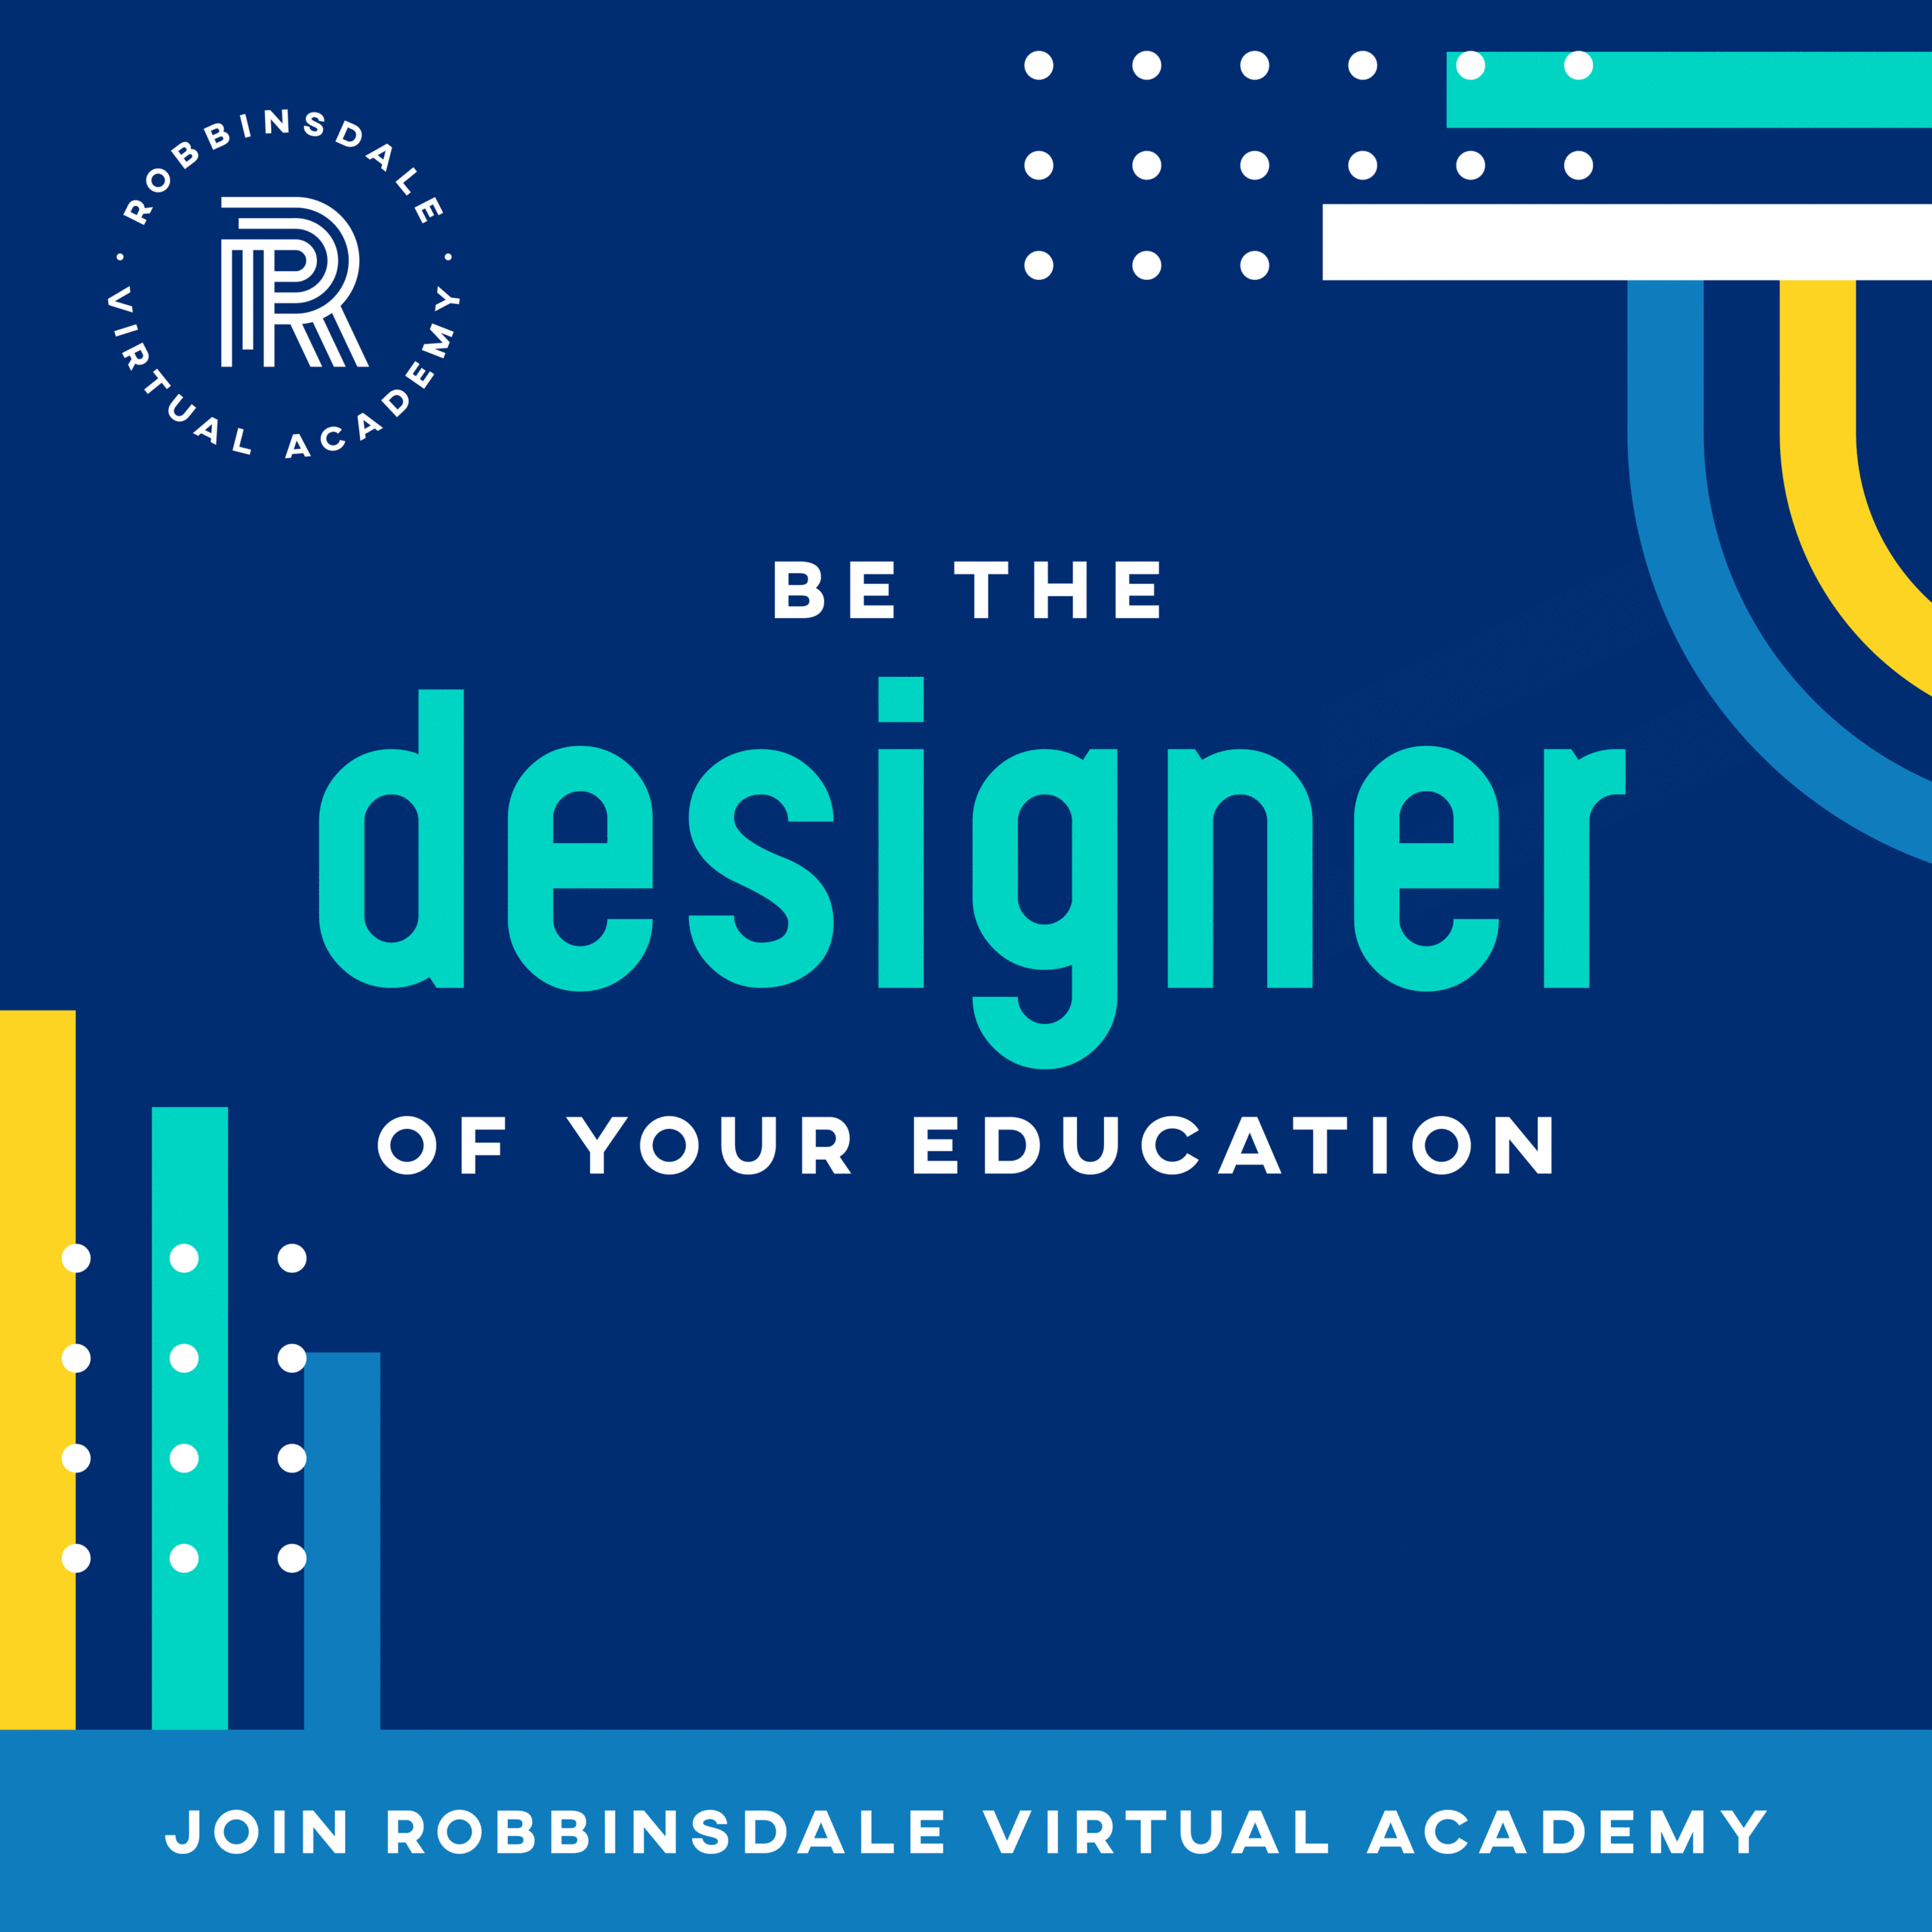 Robbinsdale Virtual Academy: be the designer of your education